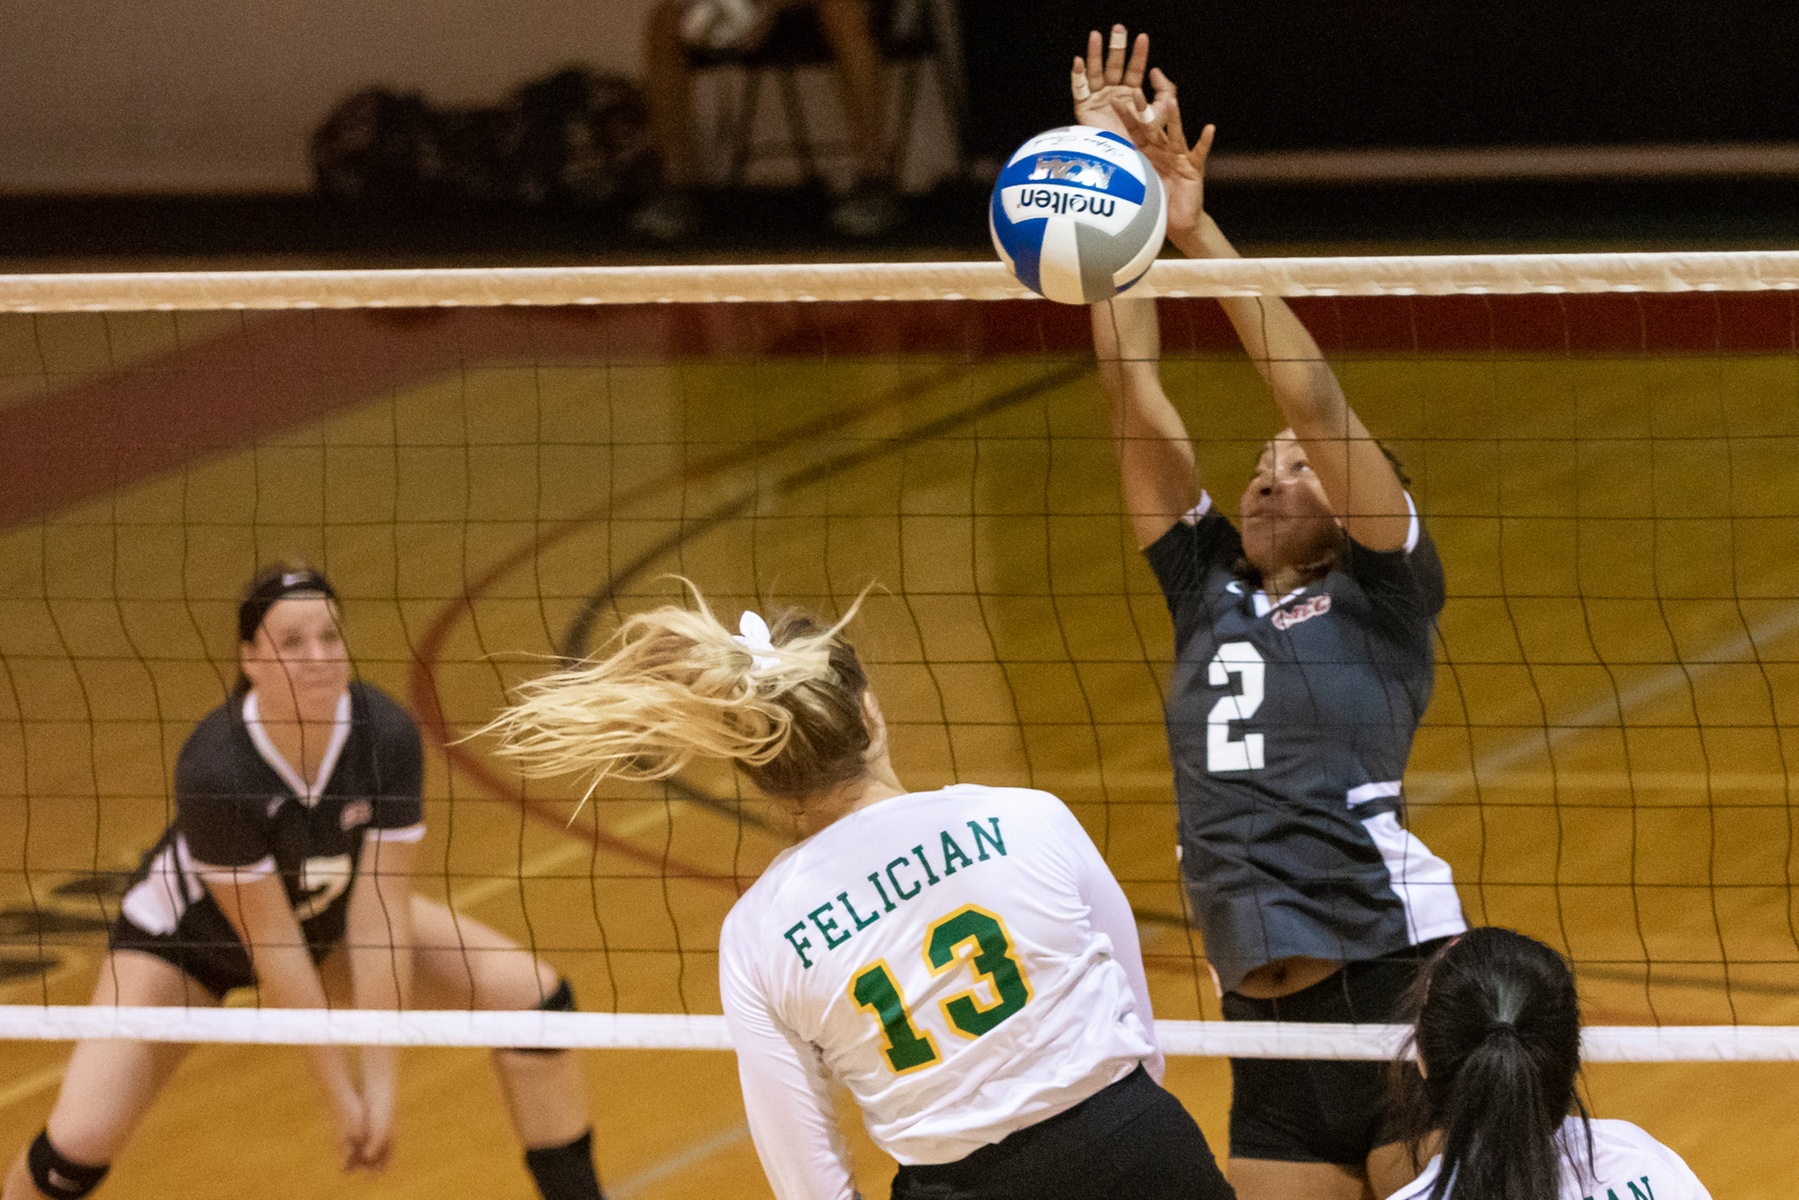 WOMEN'S VOLLEYBALL DROP CONFERENCE MATCH NYACK